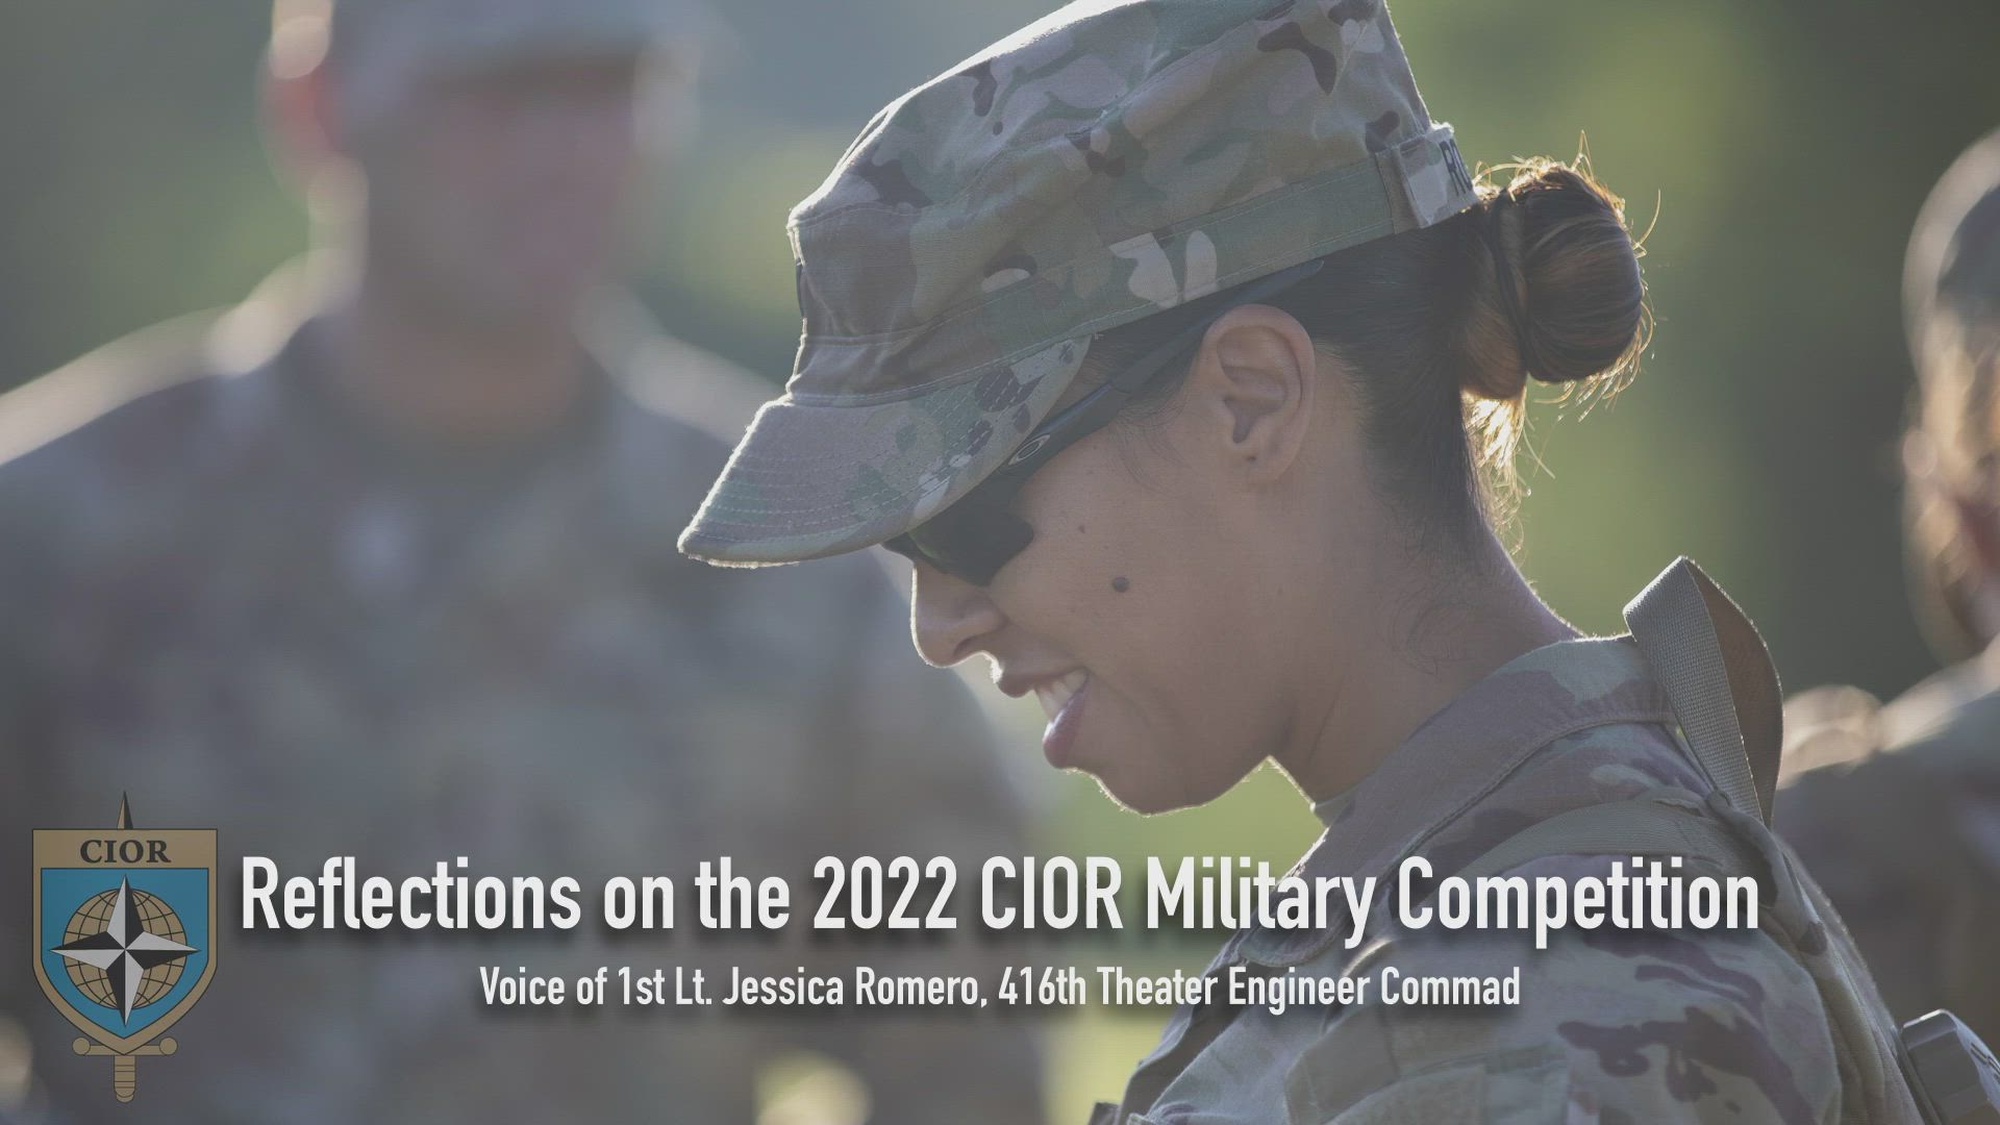 1st Lt. Jessica Romero, 416th Theater Engineer Command, reflects on her experience during the Interallied Confederation of Reserve Officers Military Competition (CIOR MILCOMP). This competition is an annual reserve military competition with NATO member states and other participating nations with 34 countries in total, representing 1.3 million reservists. The MILCOMP, which has been held since 1957, is a military pentathlon testing service members in pistol and rifle marksmanship, land and water obstacles and orienteering.